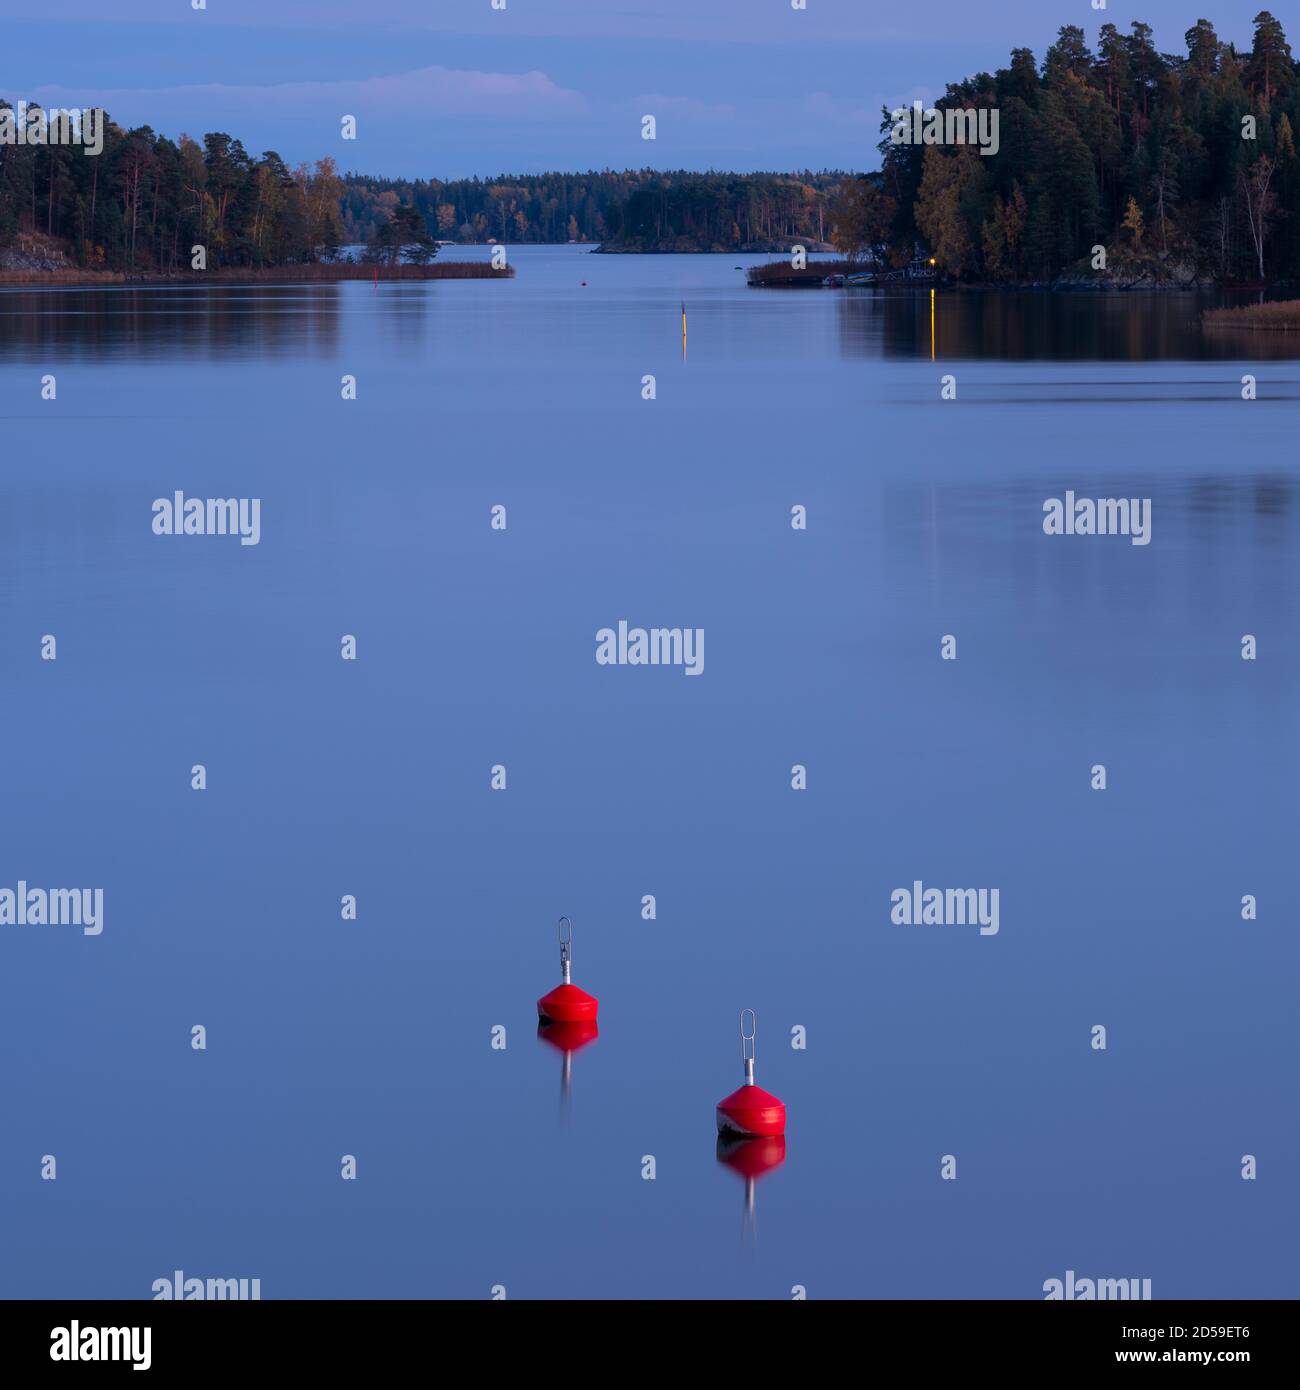 Helsinki/Finland - OCTOBER 11, 2020: Two red buoys floating in calm sea on a beautiful autumn evening. Stock Photo